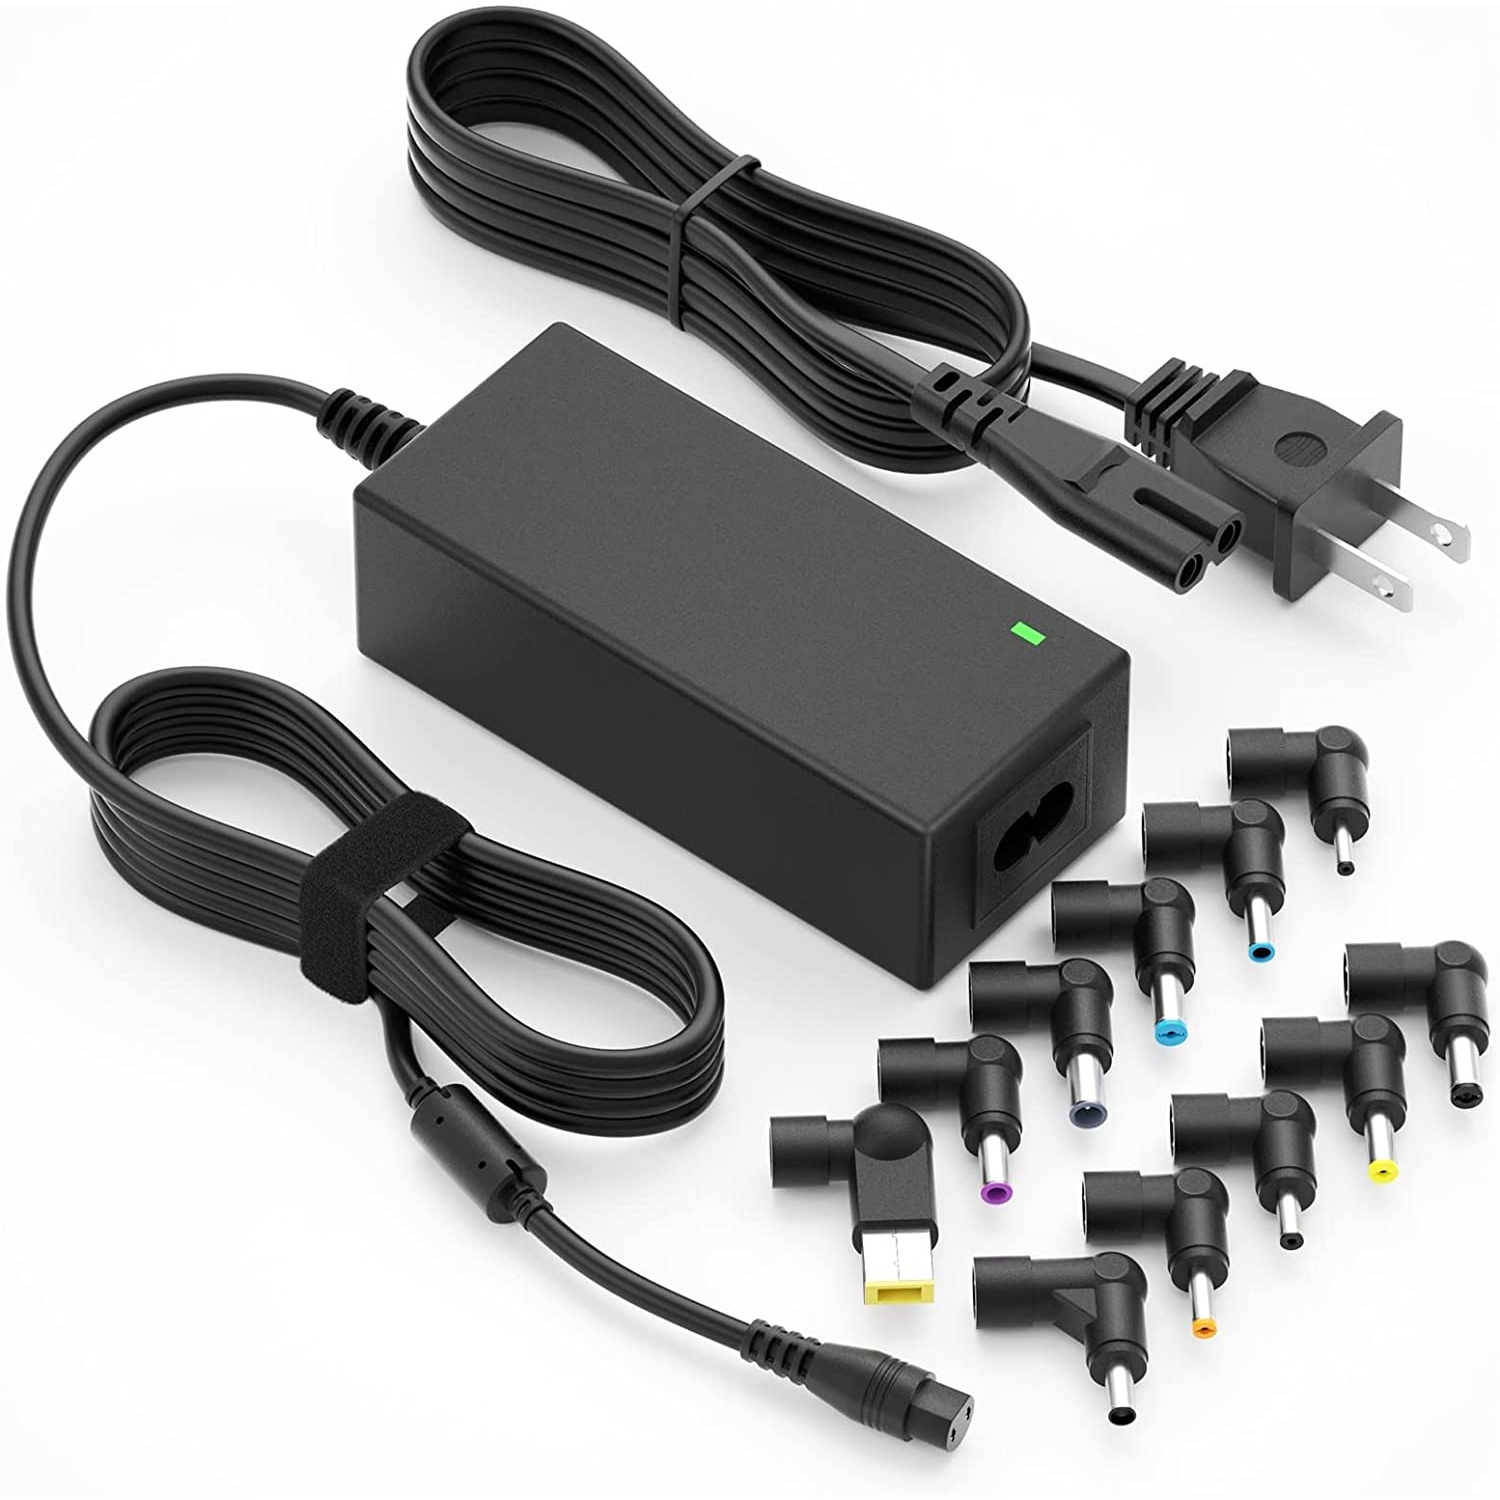 Universal Laptop Charger 45W Power Adapter for Dell hp Samsung Sony Asus Acer Toshiba FUJITSU Delta NEC Liteon